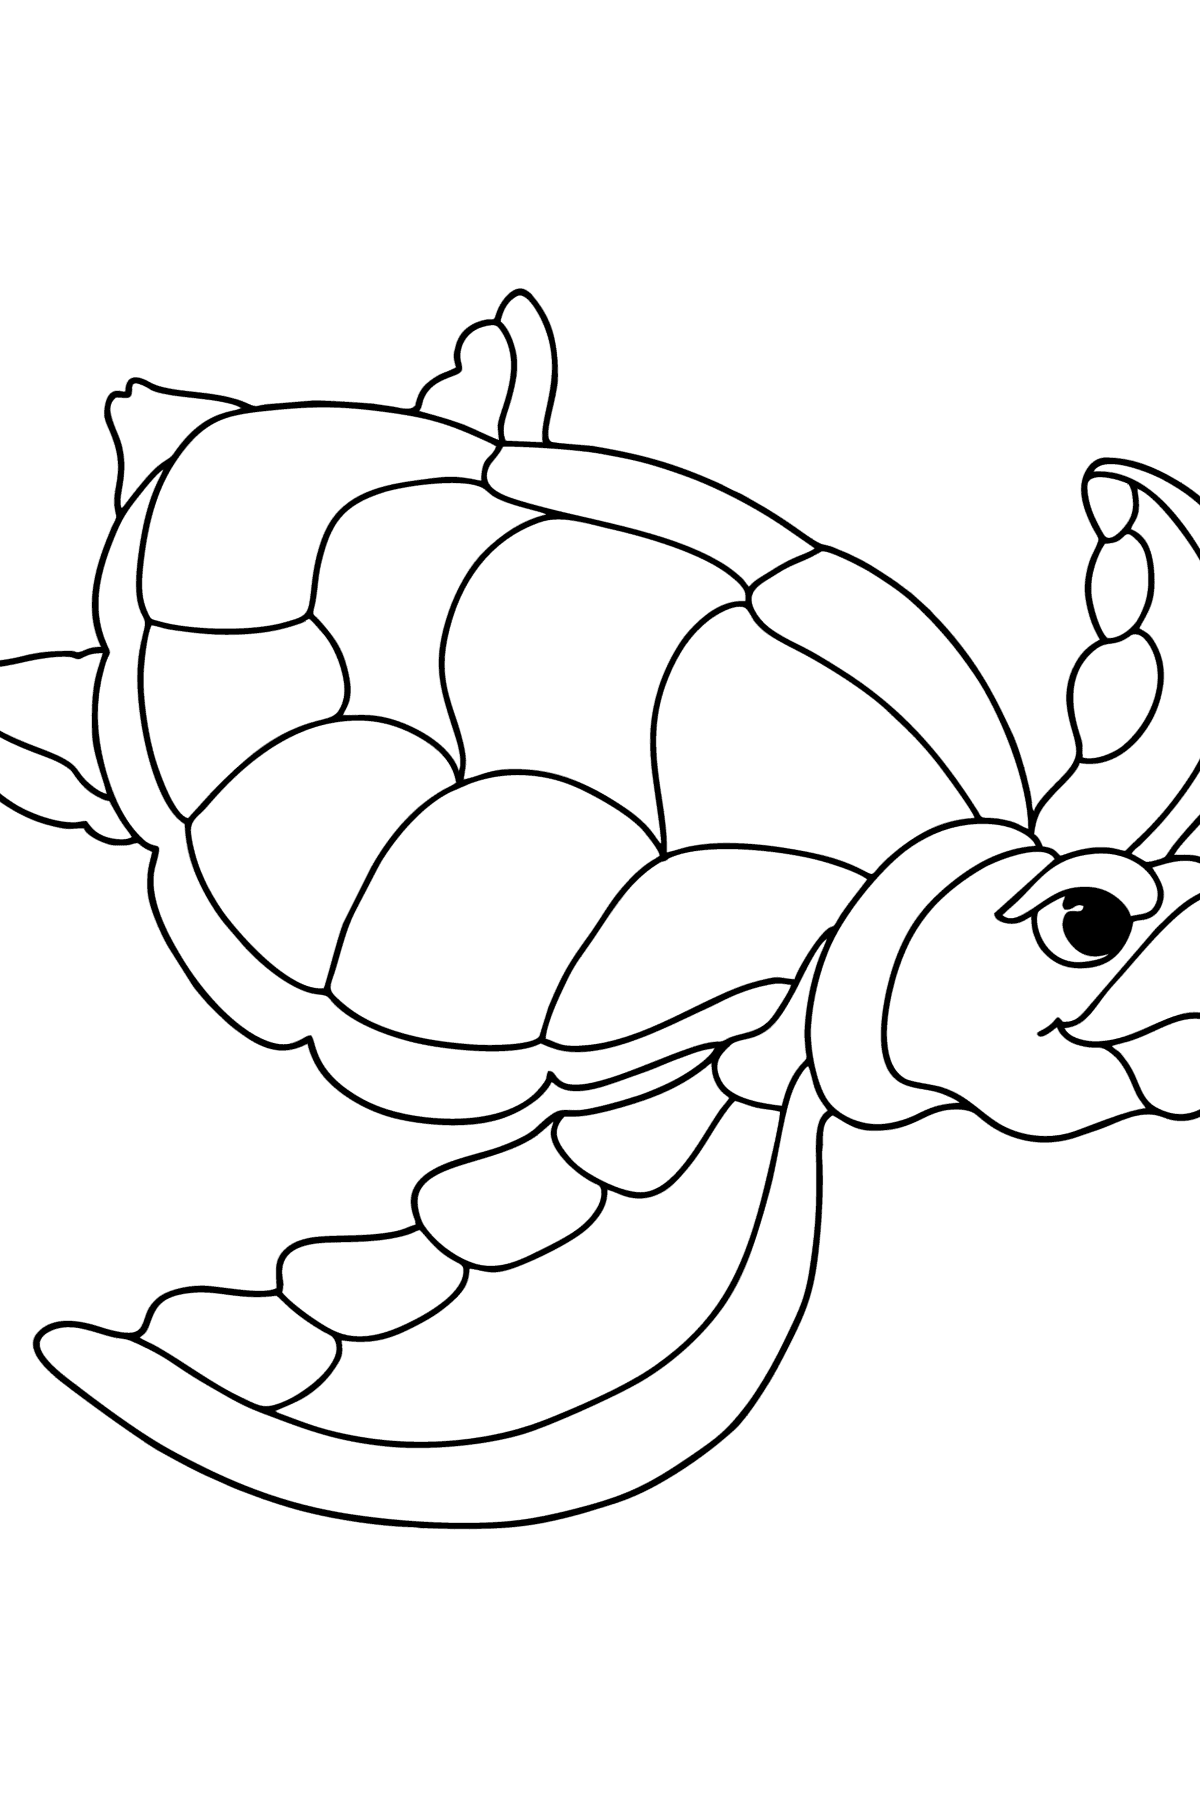 Sea turtle Australia сoloring page - Coloring Pages for Kids